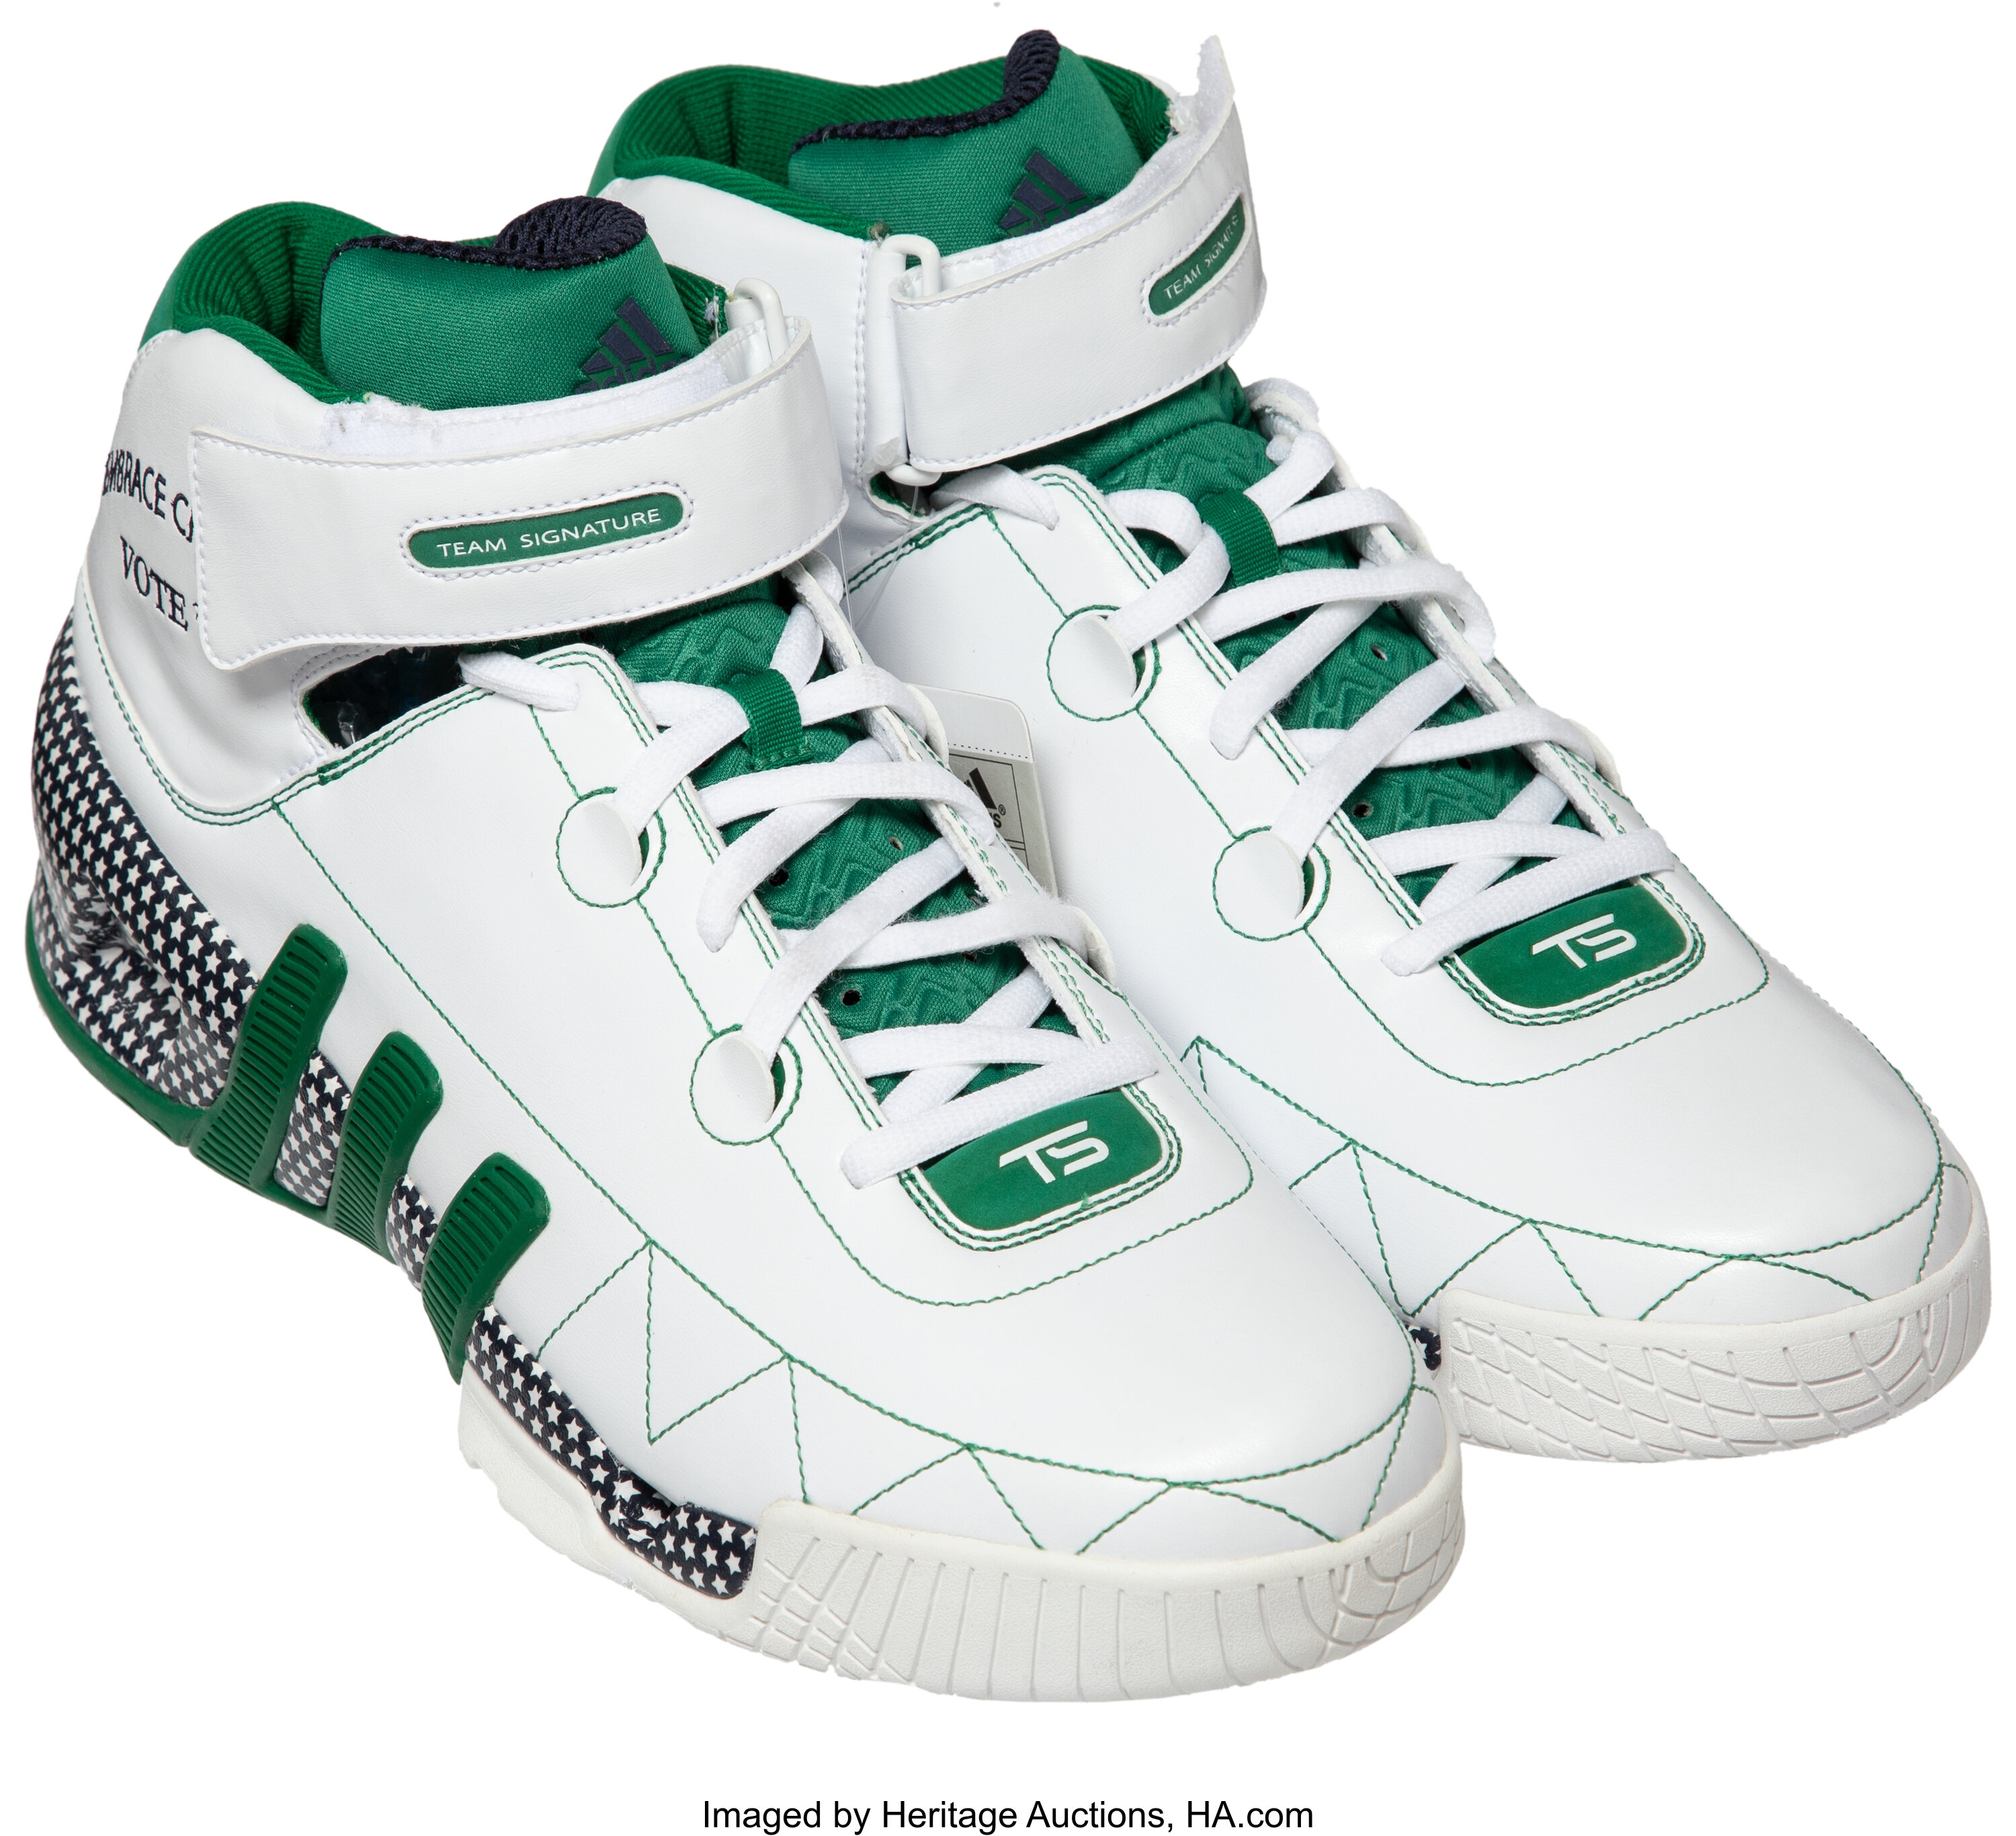 2008 Kevin Garnett Player Exclusive Adidas Sneakers Created for | #53235 | Heritage Auctions